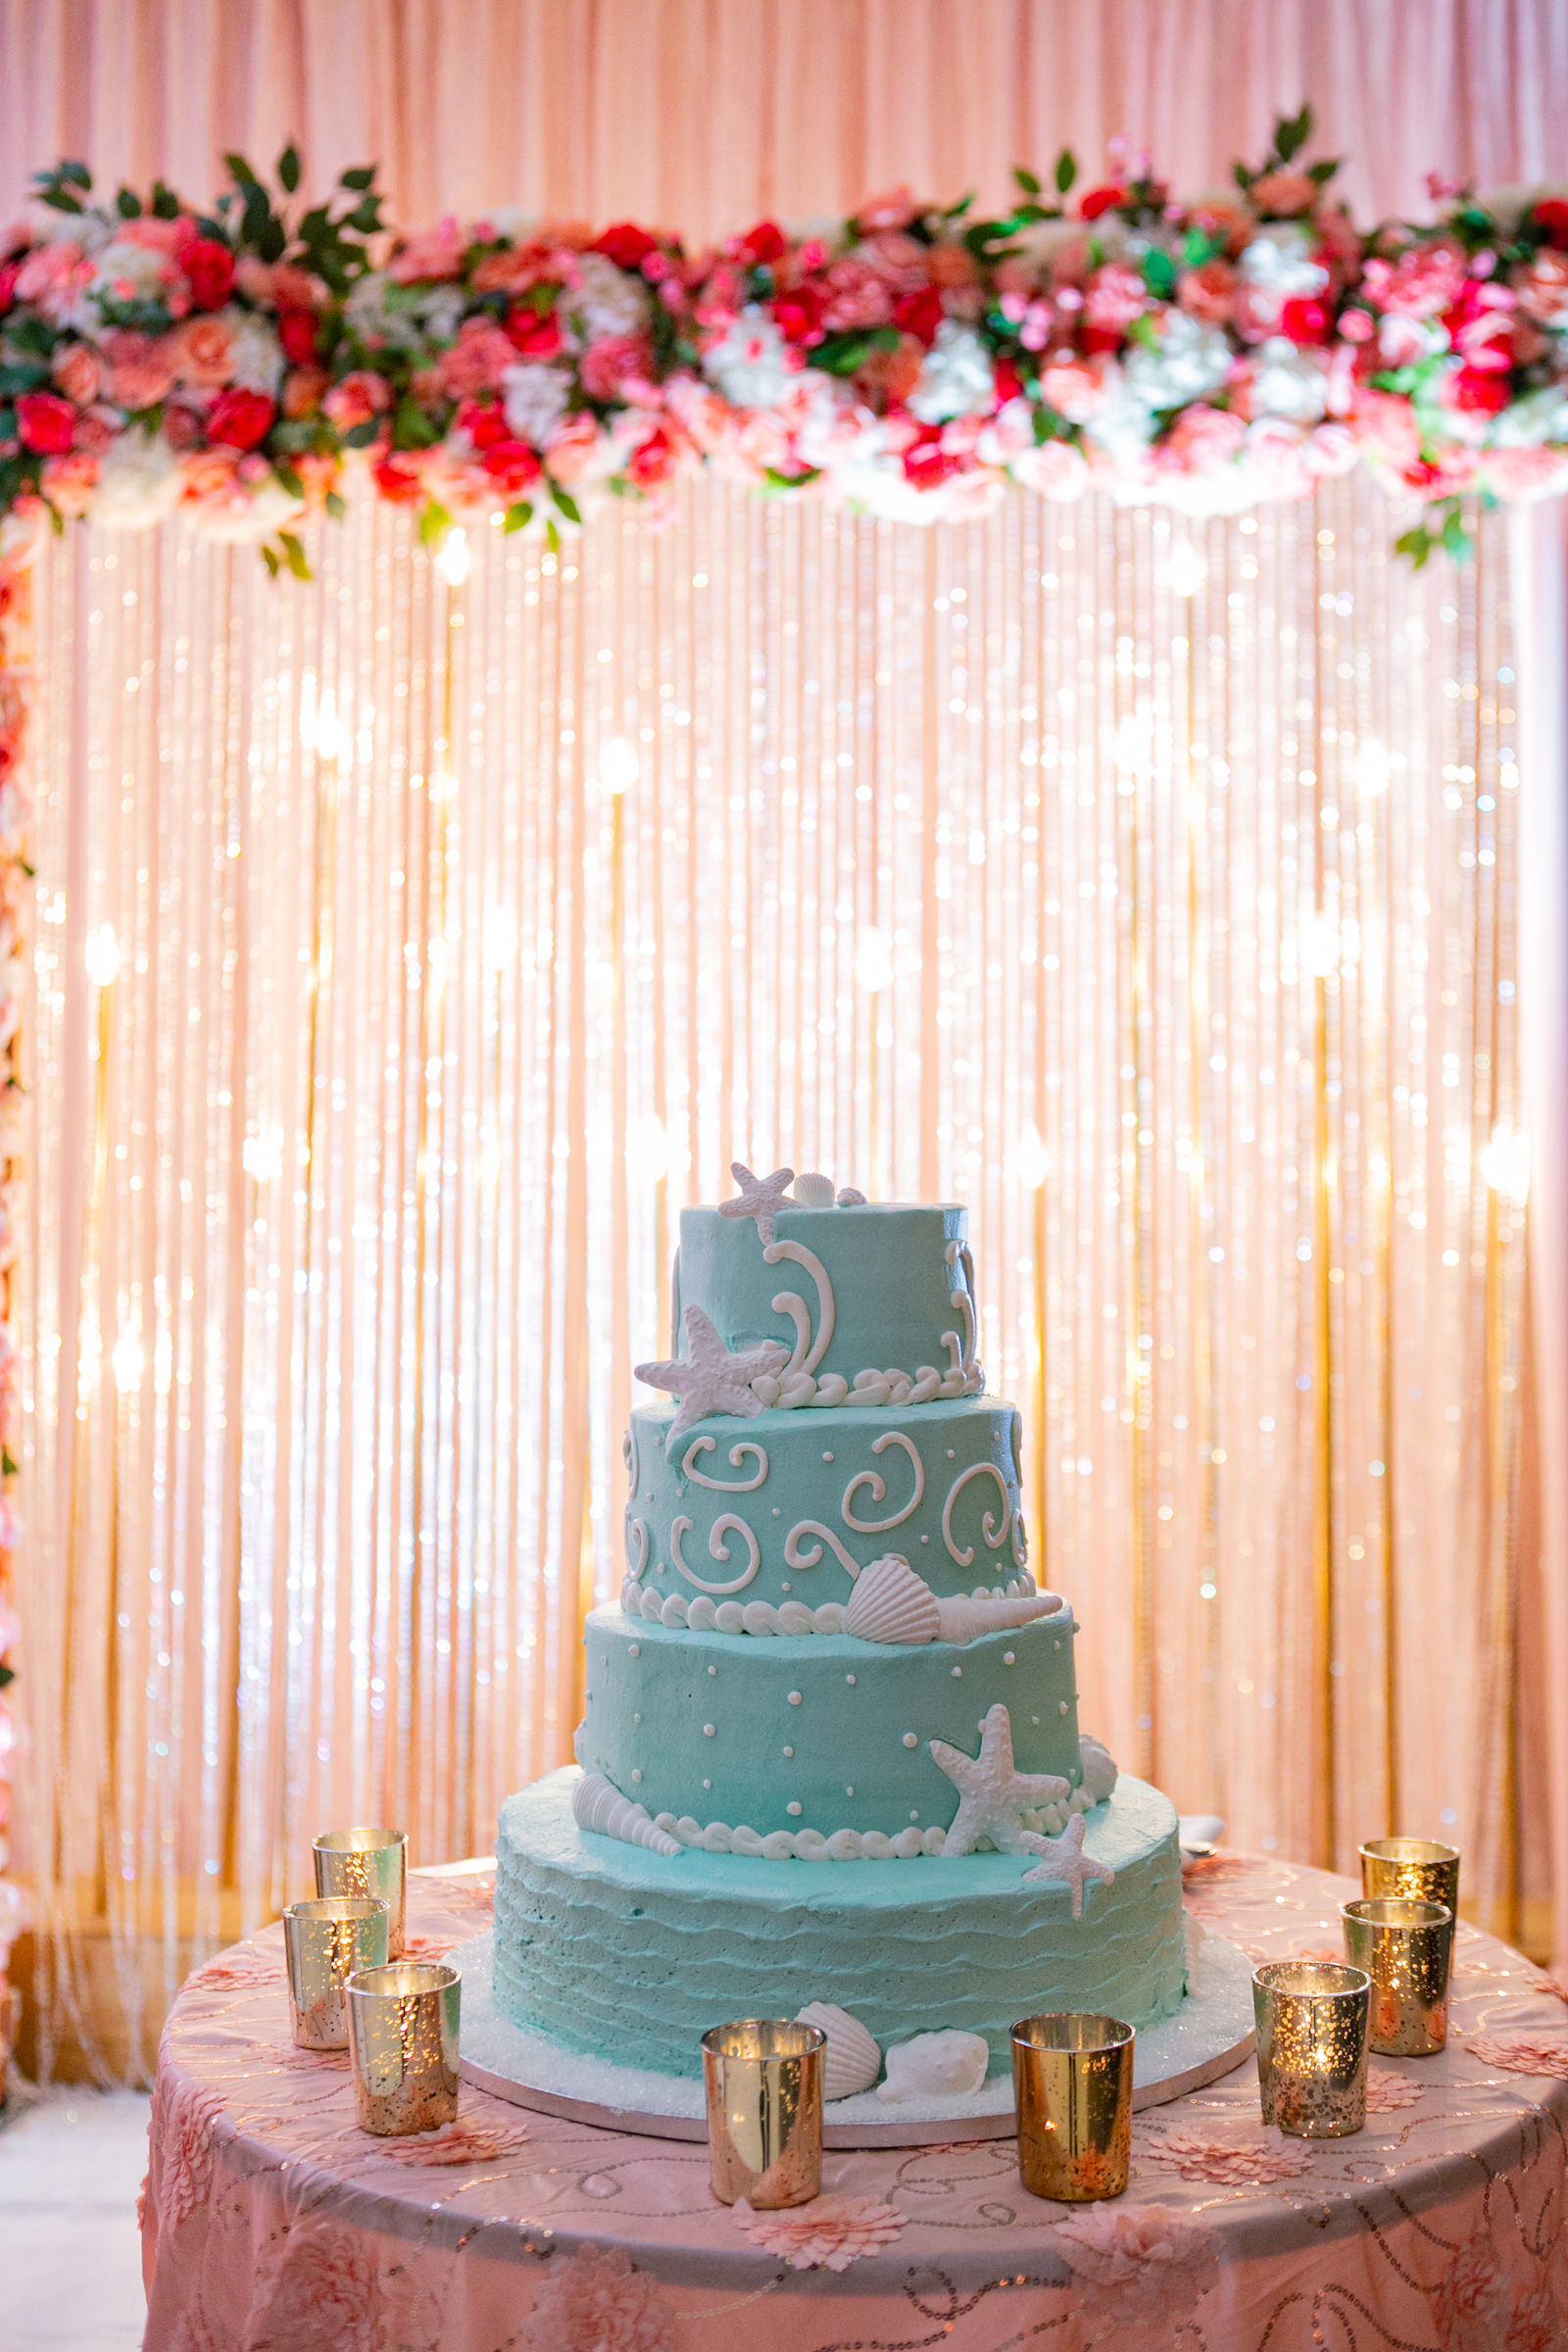 Tampa Clearwater Beach Indian Wedding Cake with Twinkle Light Curtain Wall | Four Tier Buttercream Turquoise Teal Aqua Beach Wedding Cake with Starfish and Sea Shells by Publix